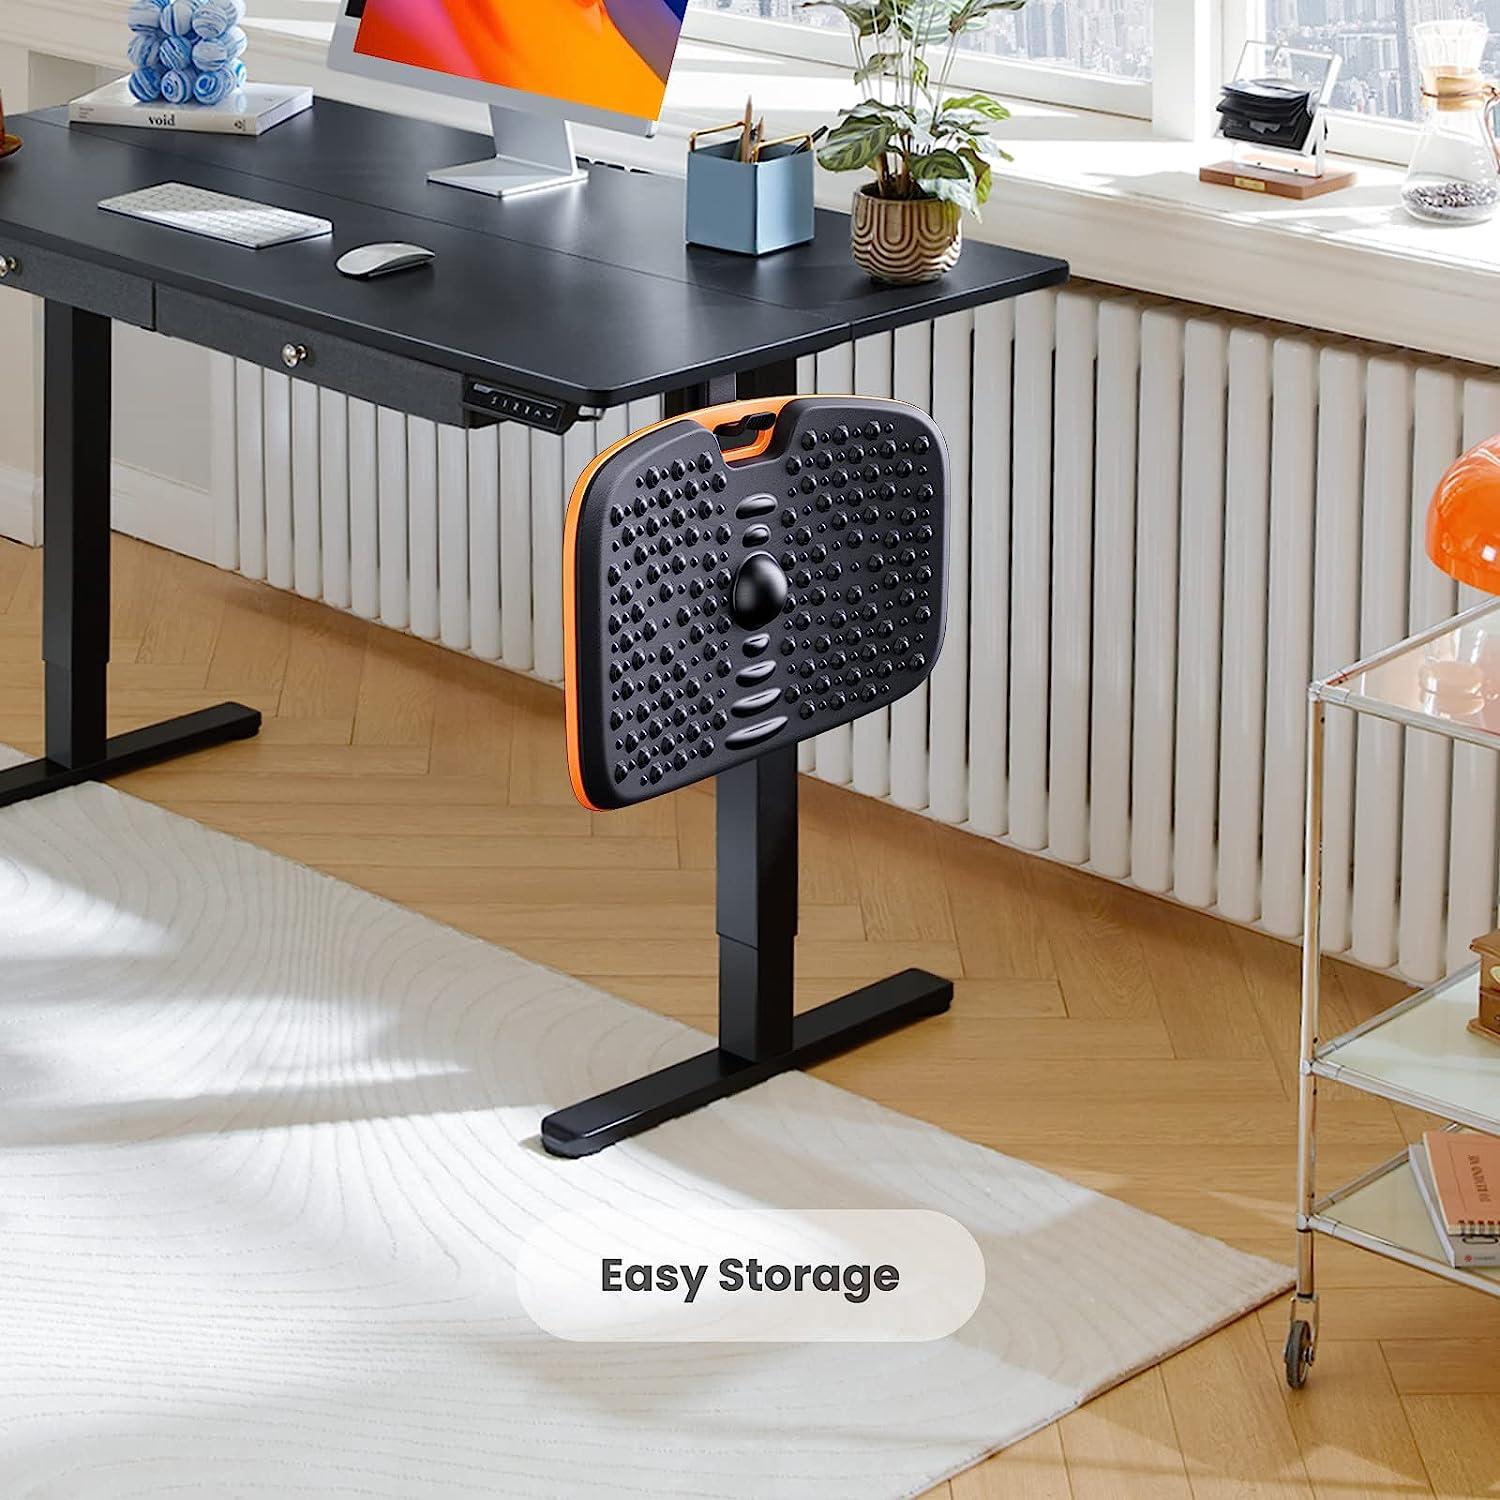 L Standing Desk Chair with Adjustable Height and Anti-Fatigue Mat